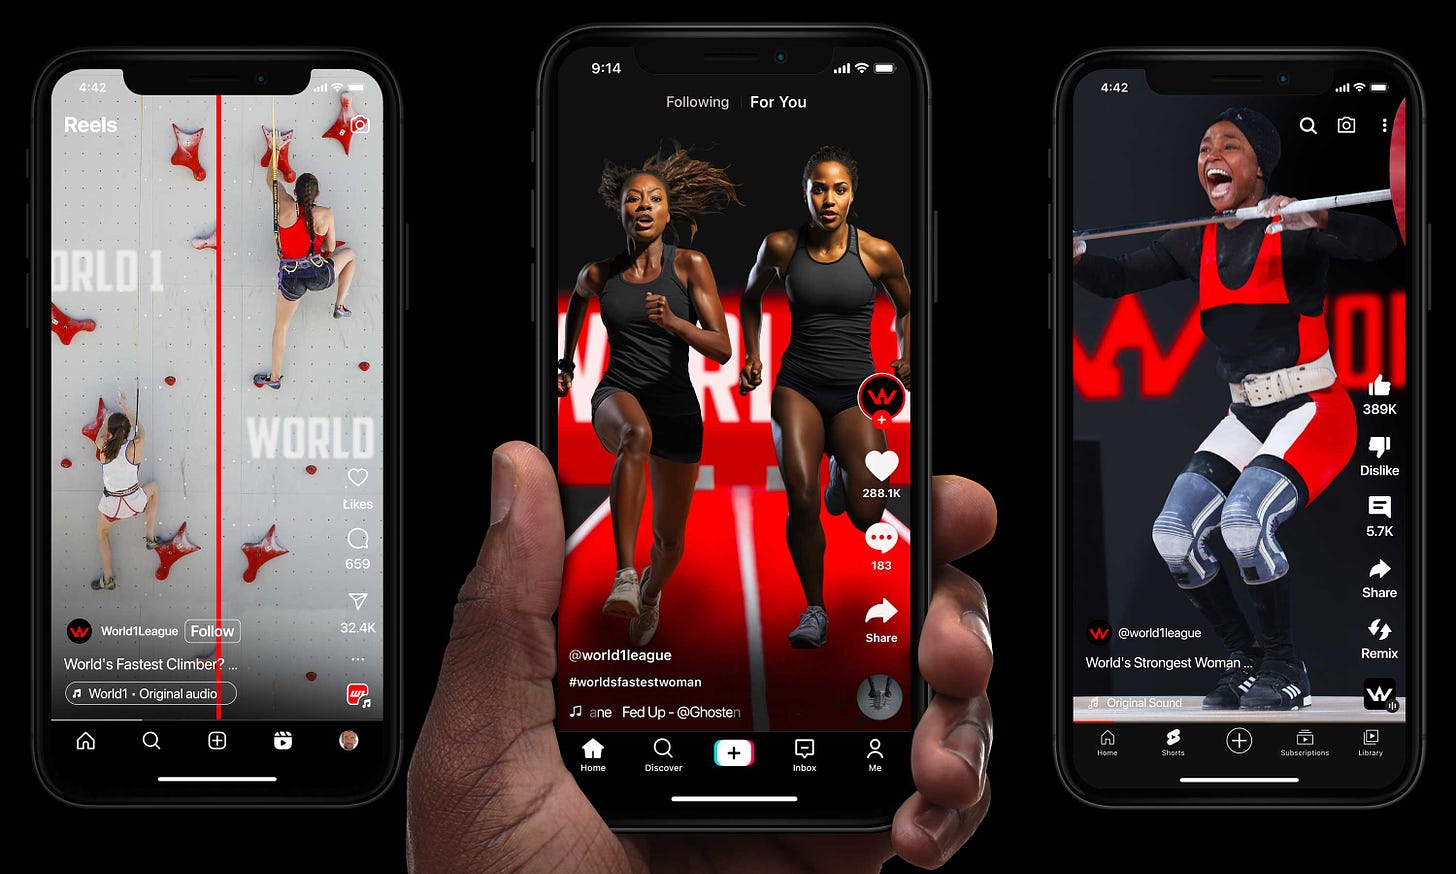 World 1 events shown as short-format videos on 3 different mobile phones. Shown are speed climbing, 100 meter dash and weightlifting.